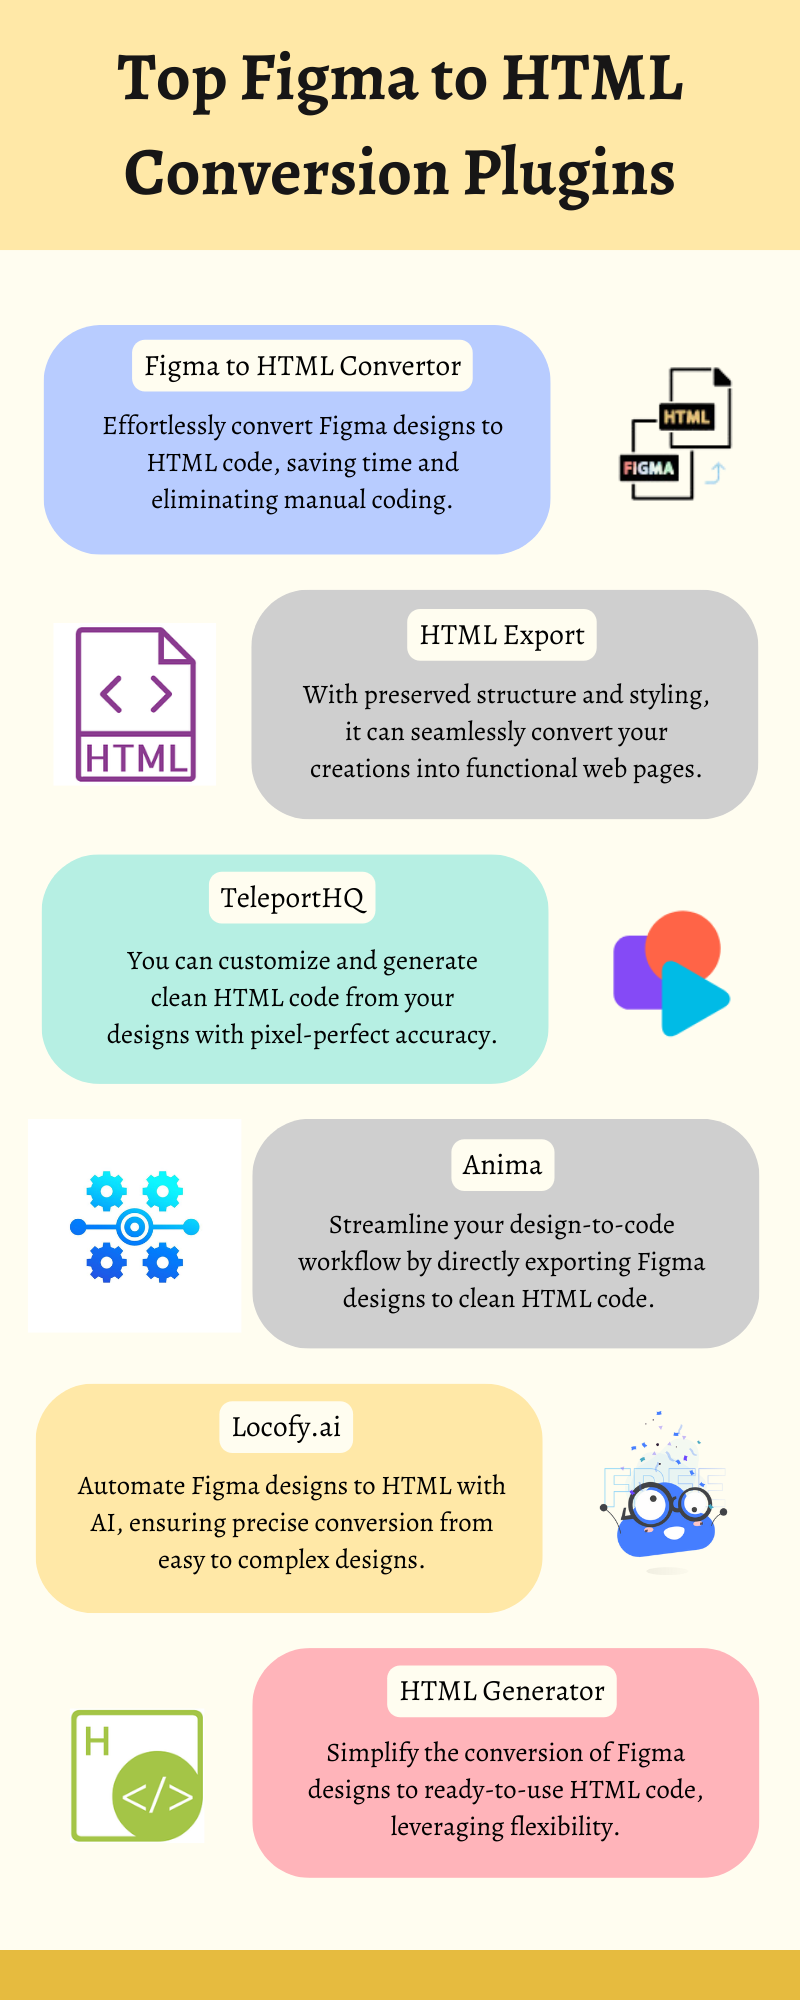 Best Figma to HTML Conversion Plugins